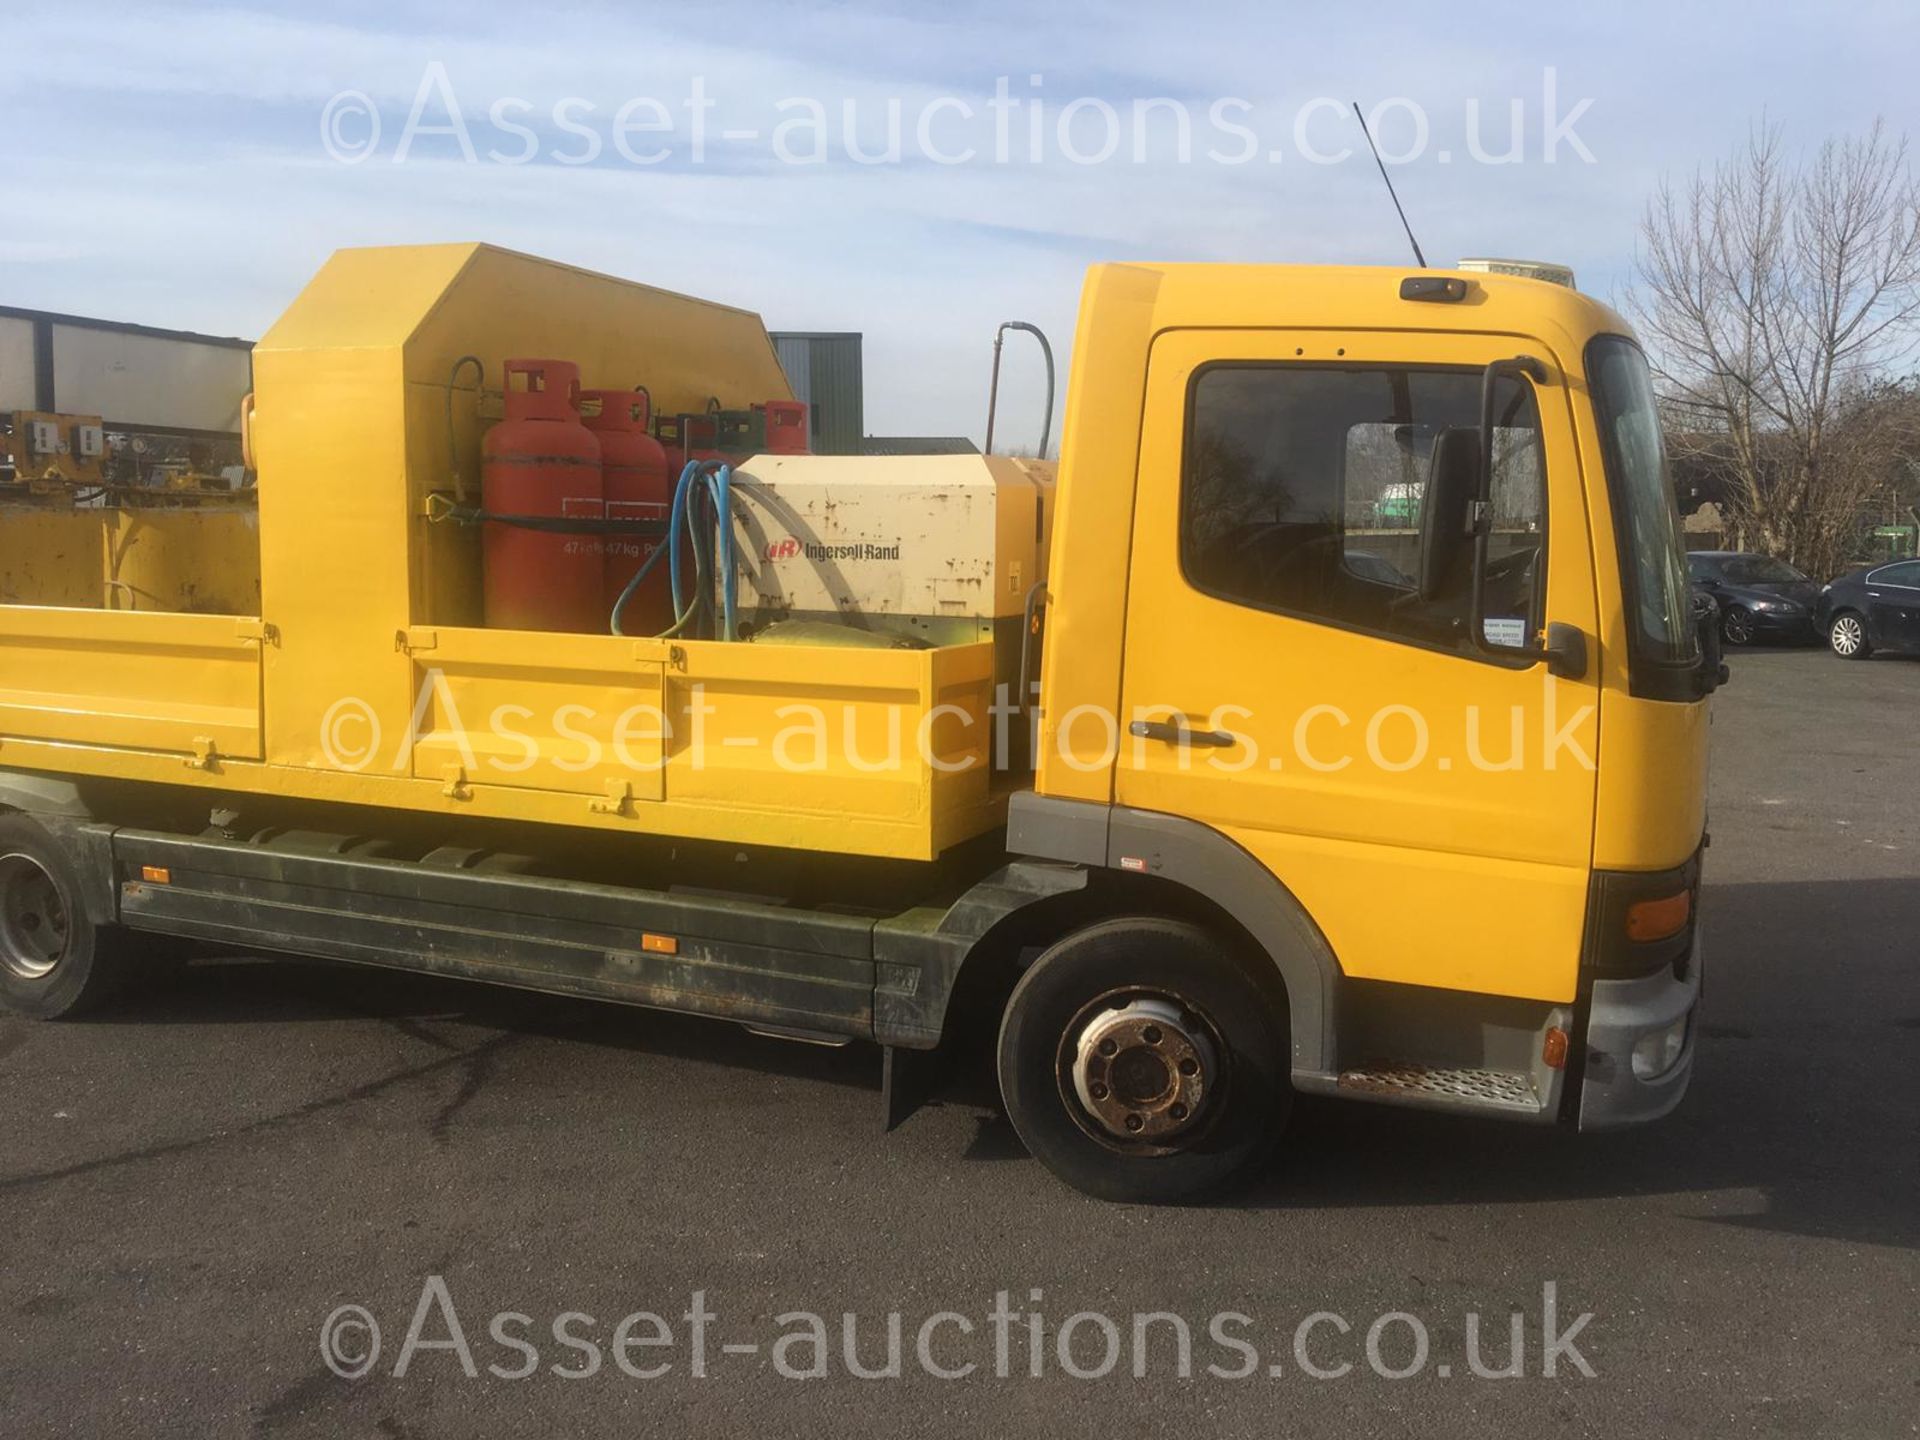 2004/54 REG MERCEDES ATEGO 1018 DAY YELLOW DROPSIDE LINE PAINTING LORRY 4.3L DIESEL ENGINE *NO VAT* - Image 5 of 128